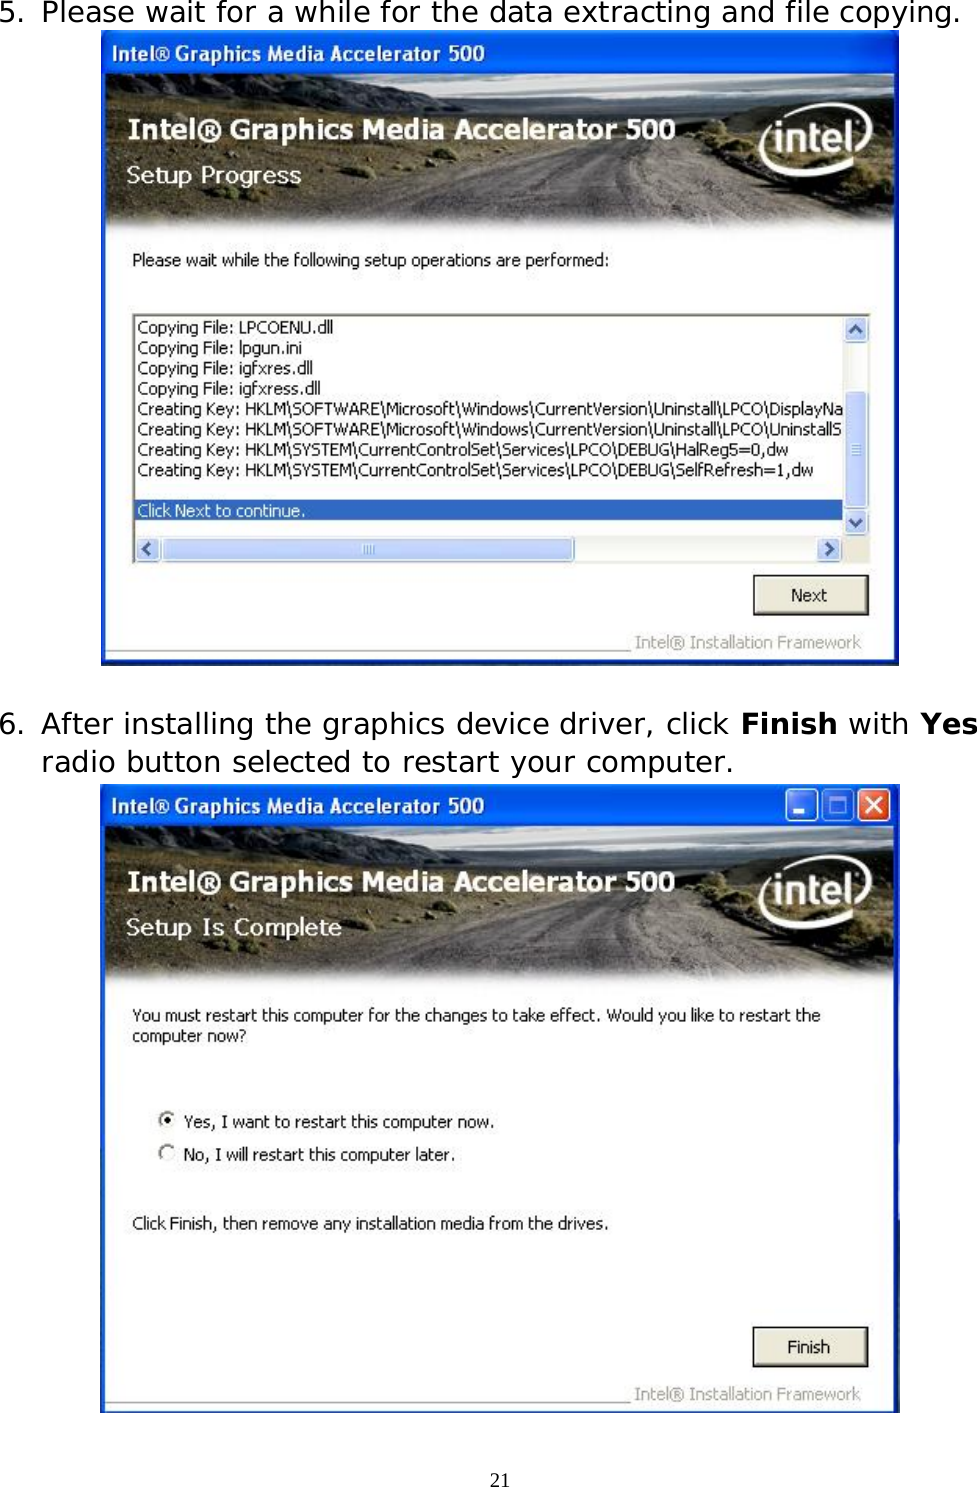  21 5. Please wait for a while for the data extracting and file copying.   6. After installing the graphics device driver, click Finish with Yes radio button selected to restart your computer.  